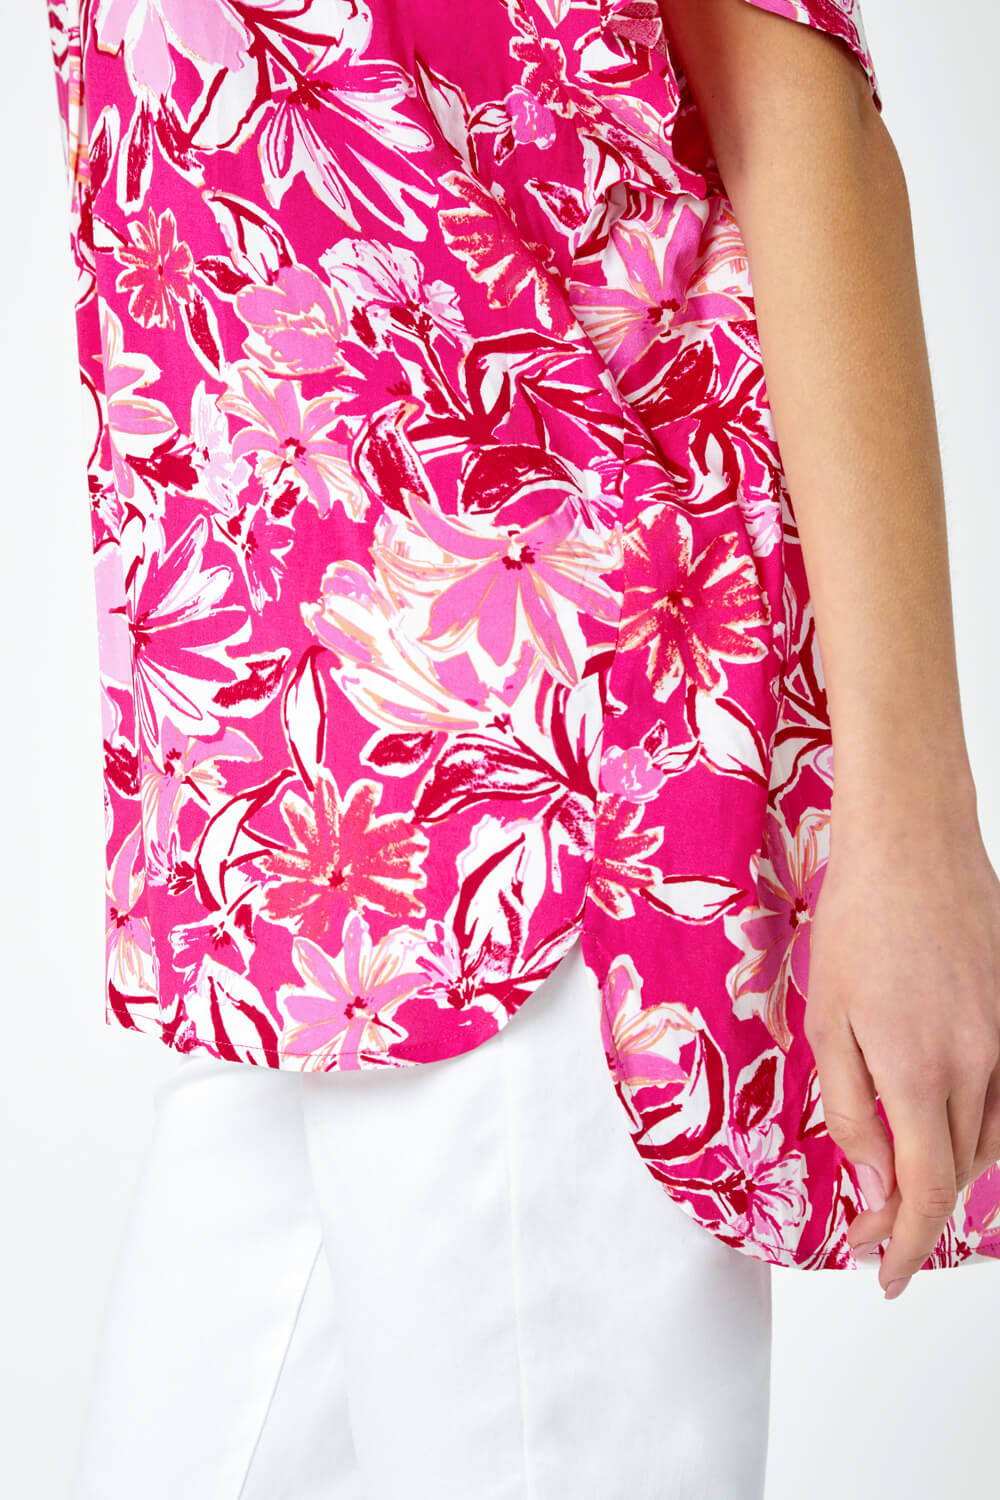 PINK Floral Print Pleat Front Overshirt, Image 5 of 5